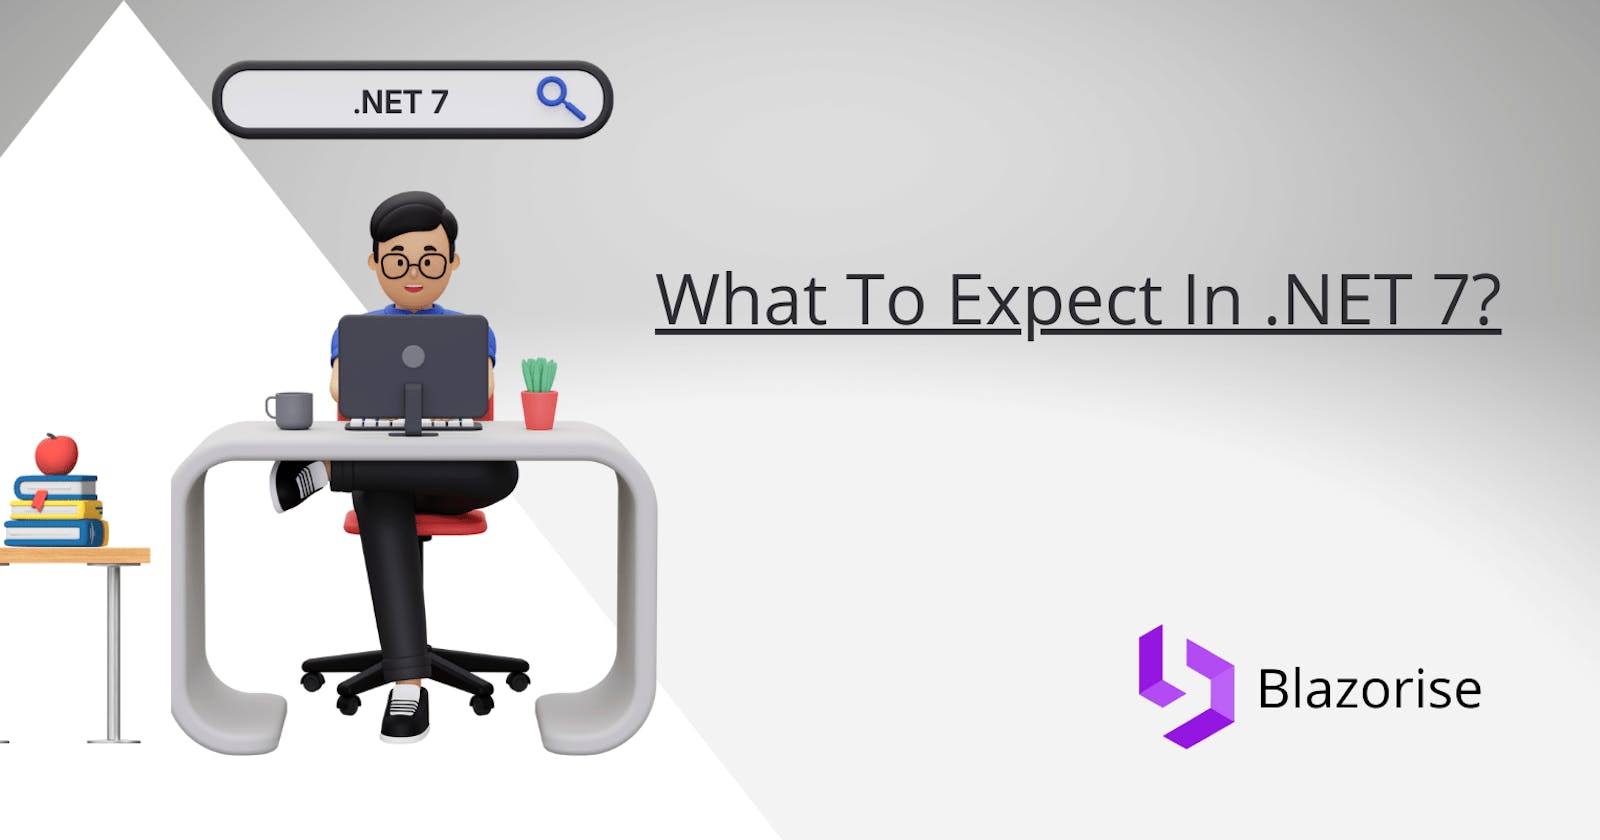 What To Expect In .NET 7?